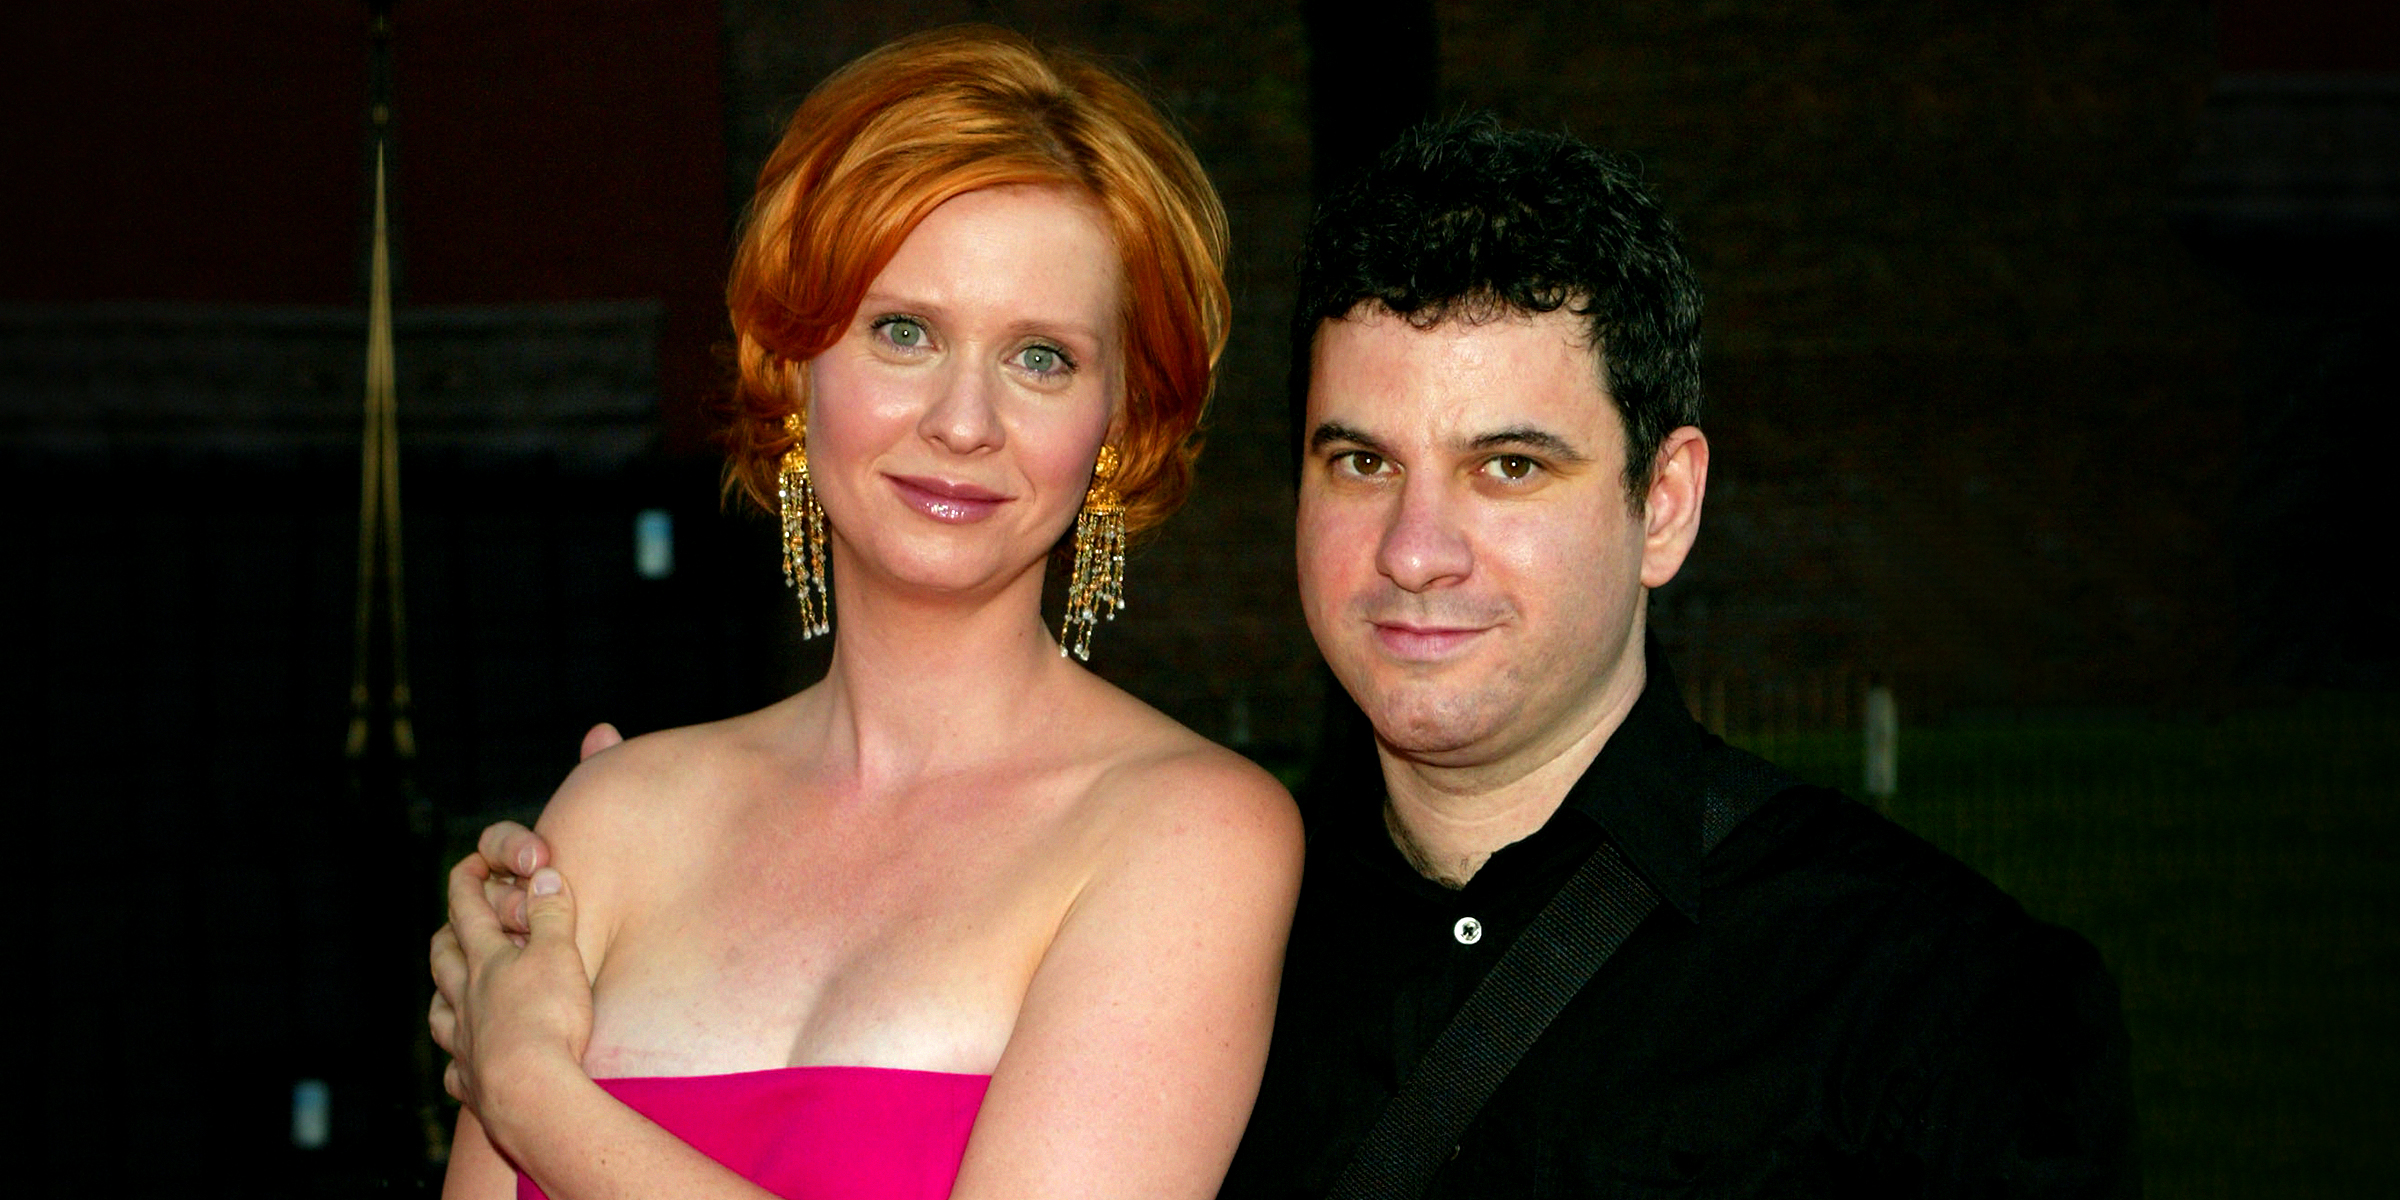 Cynthia Nixon and Danny Mozes | Source: Getty Images